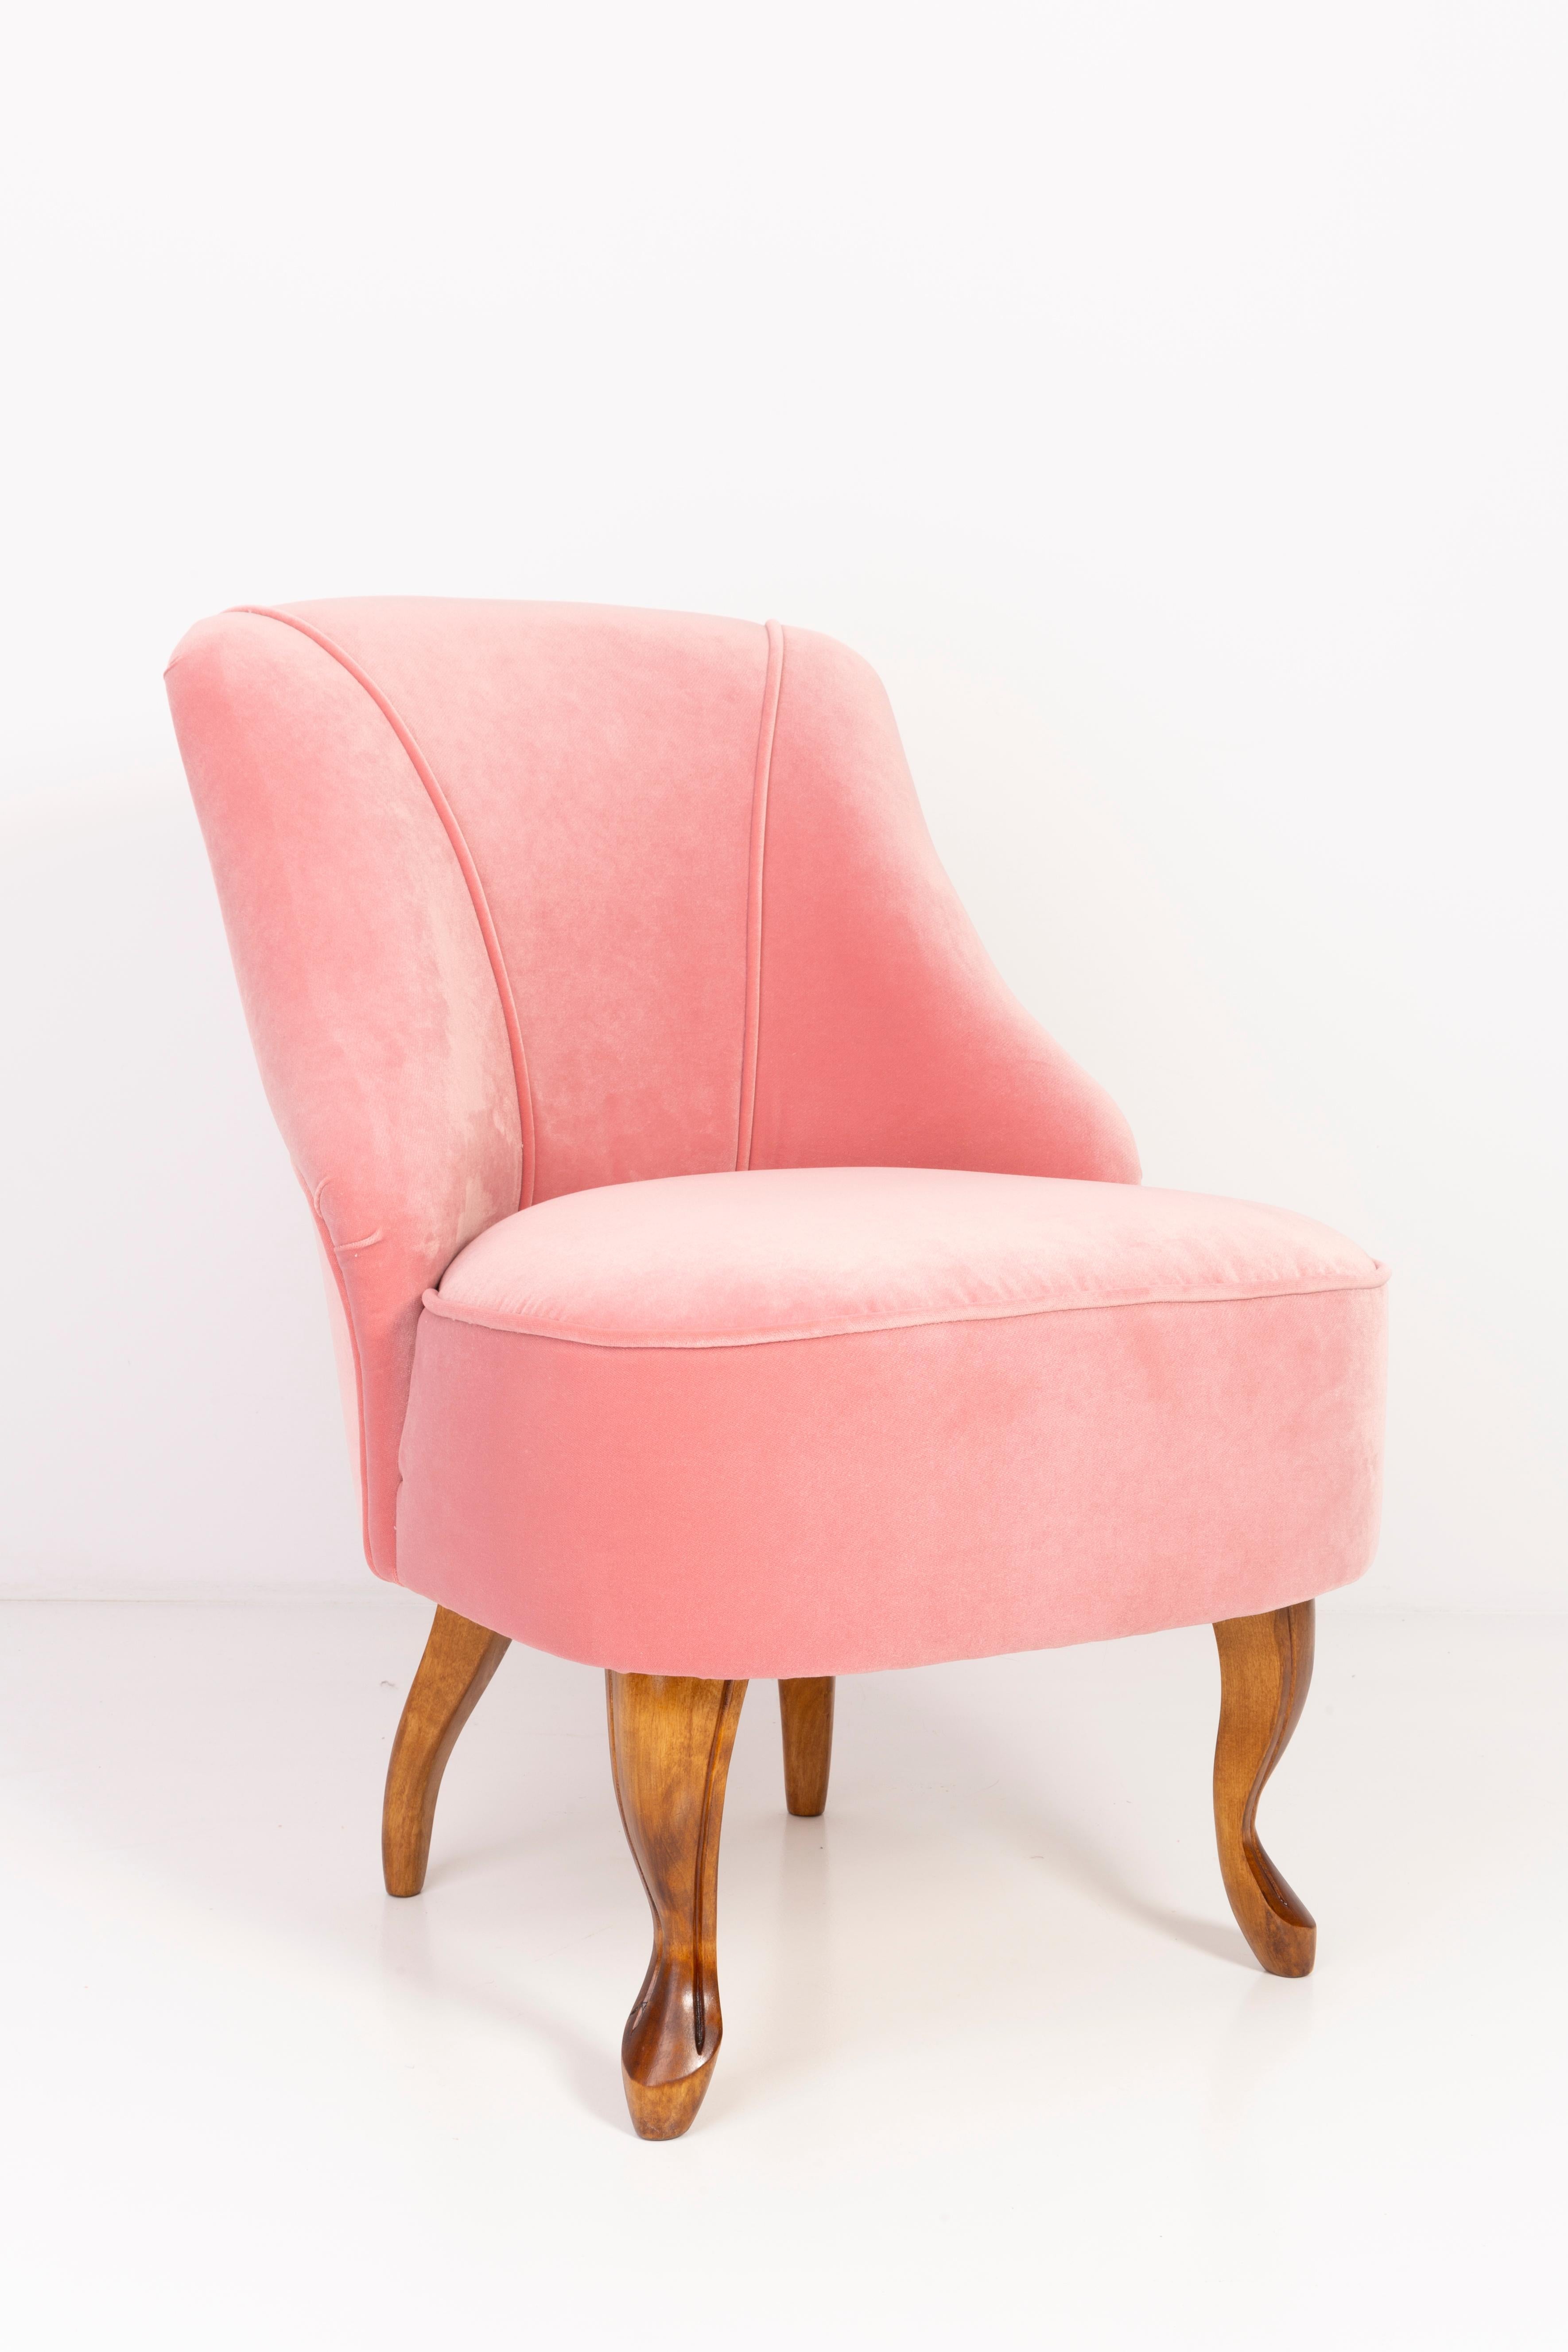 Mid-Century Modern 20th Century Art Deco Baby Pink Armchair, 1950s For Sale